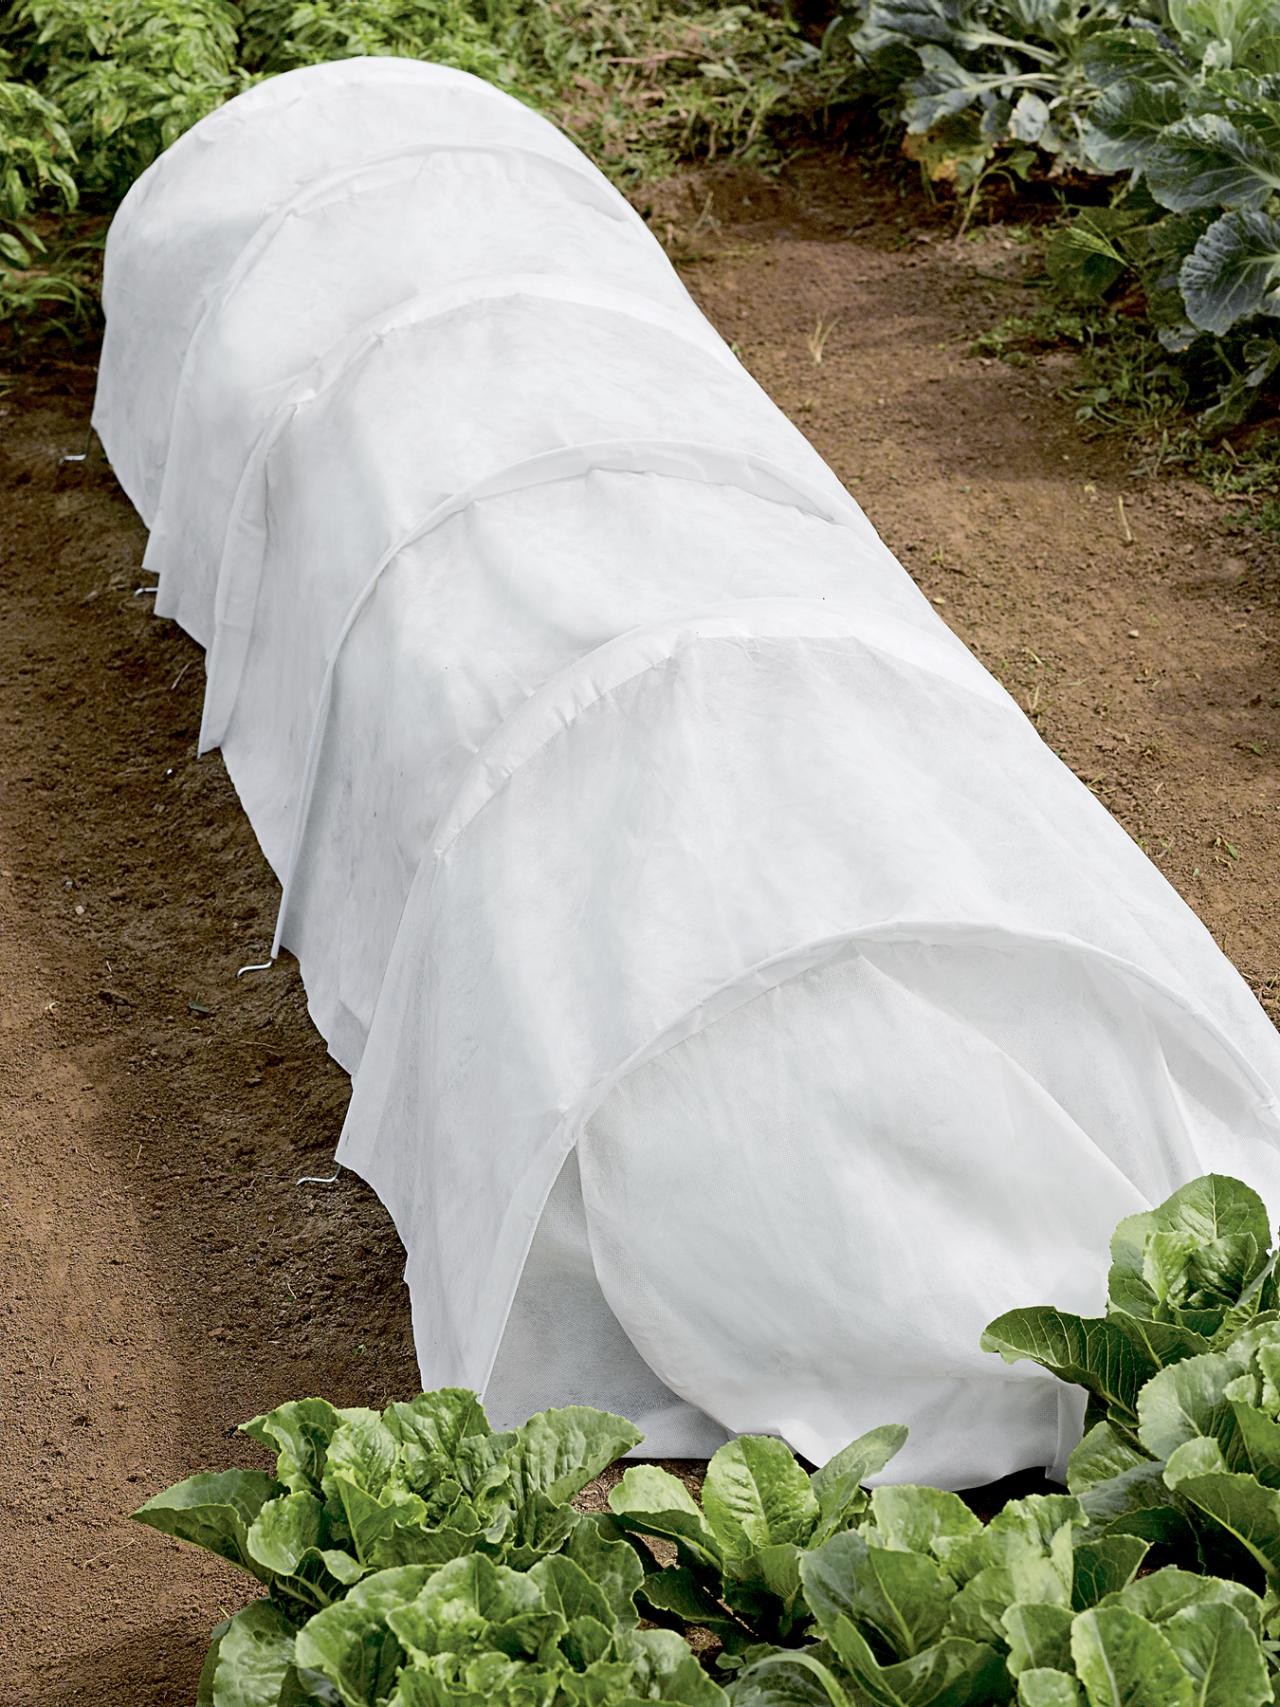 Protect Plants With Row Covers | HGTV